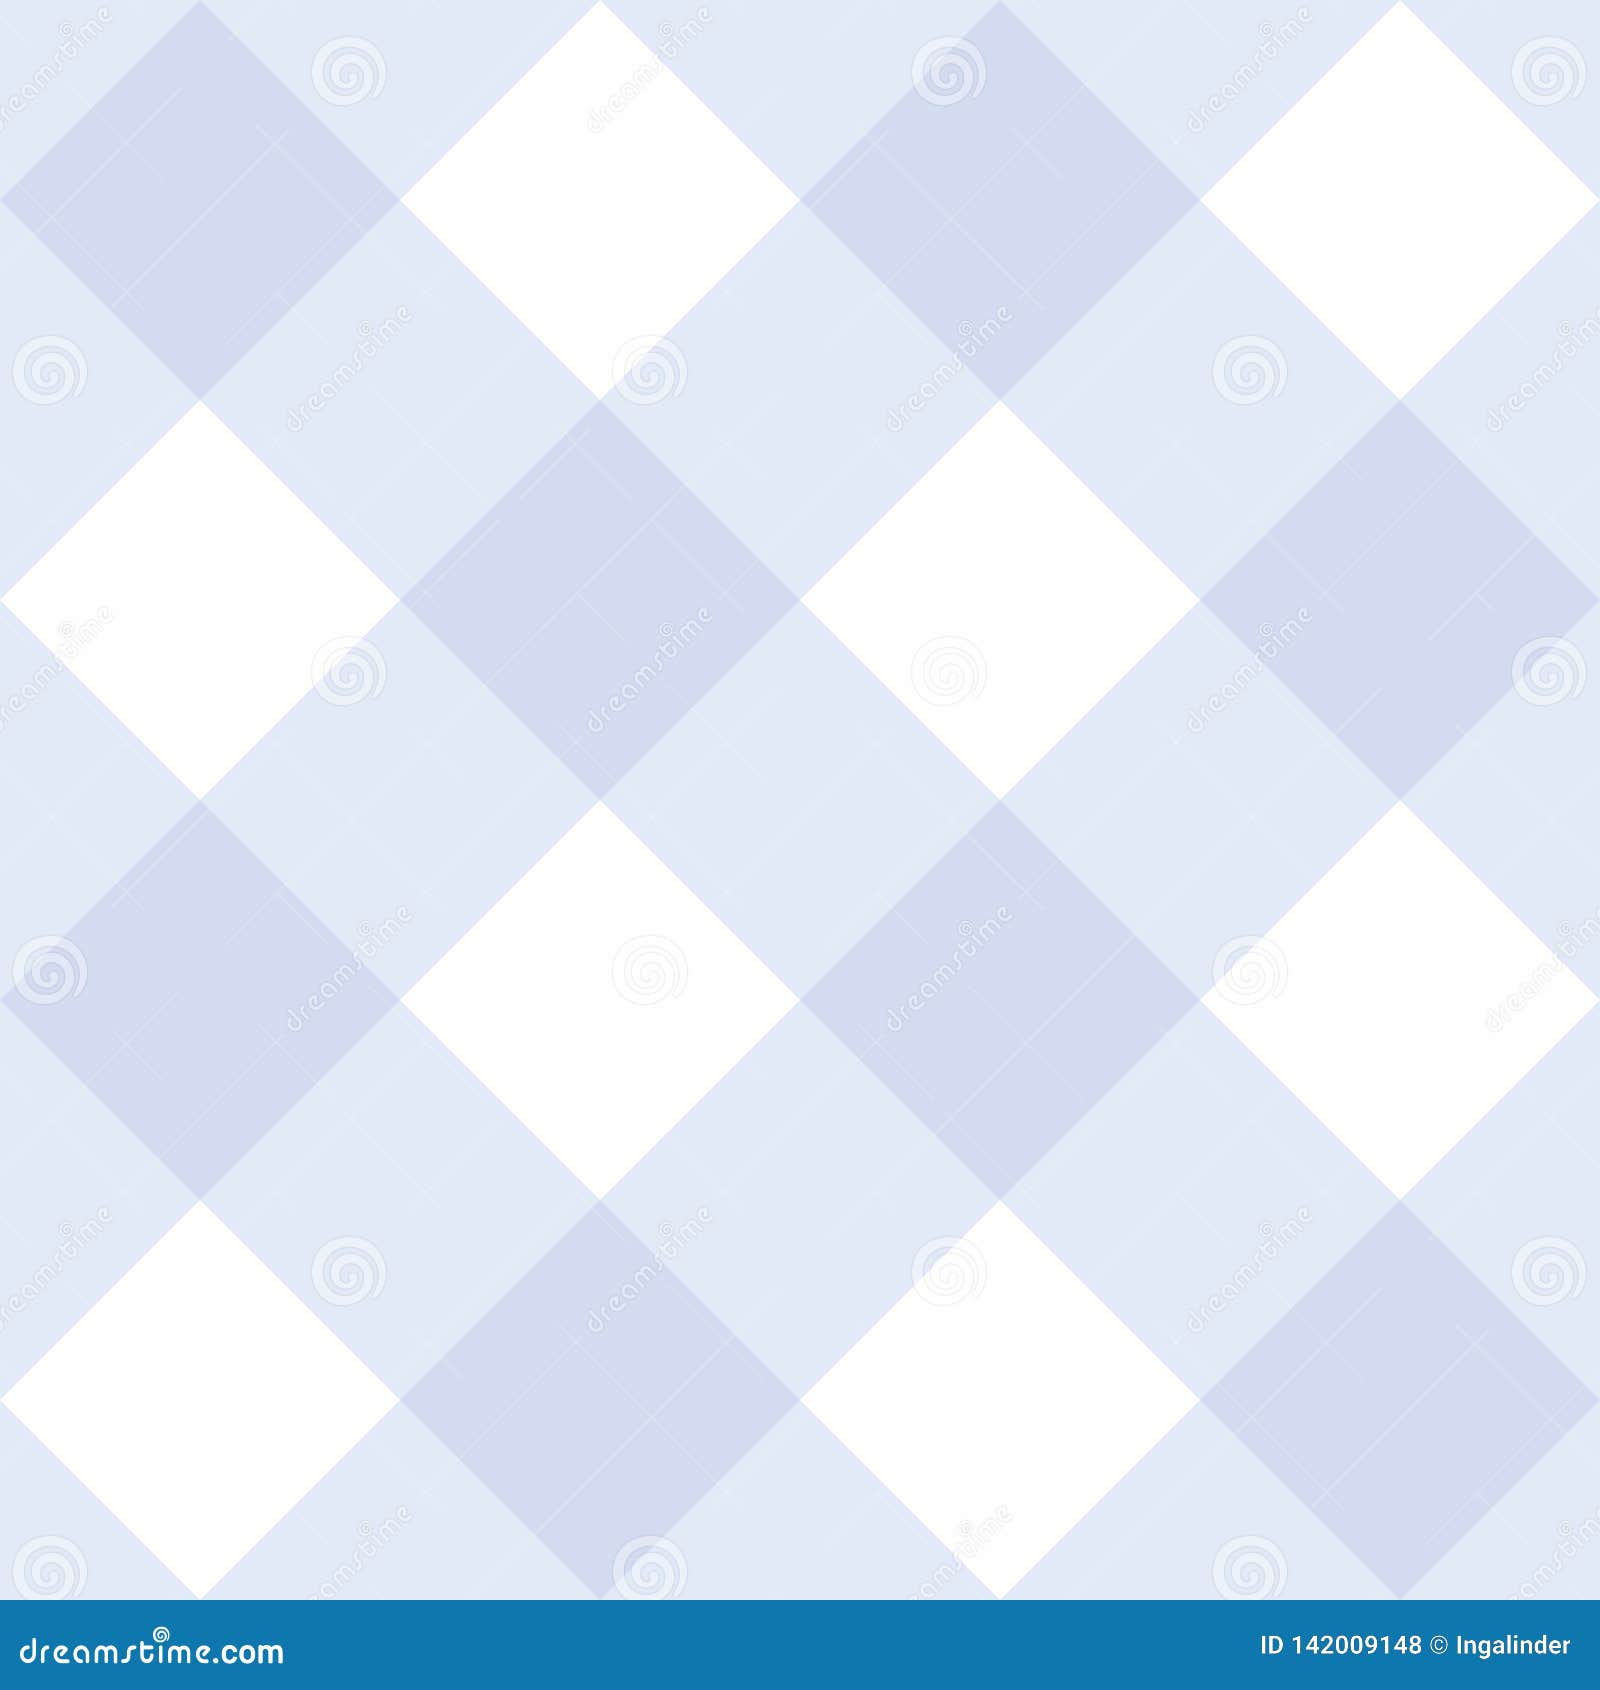 10652 Blue Grid Wallpaper Stock Photos  Free  RoyaltyFree Stock Photos  from Dreamstime